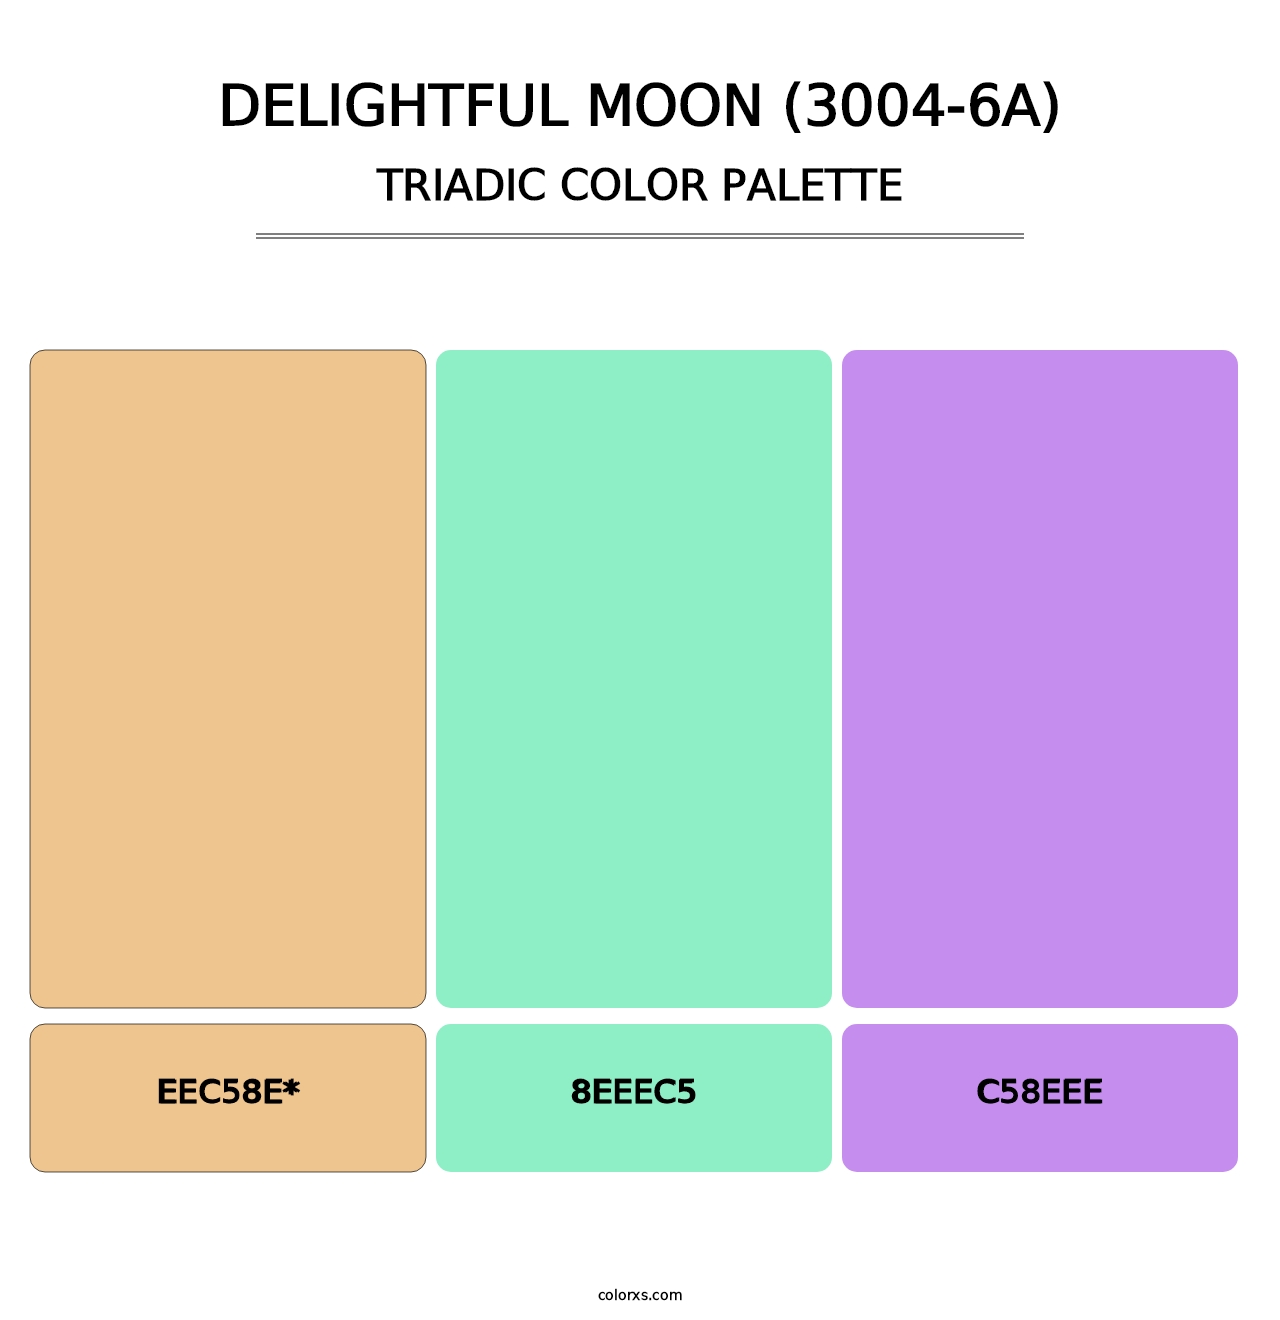 Delightful Moon (3004-6A) - Triadic Color Palette